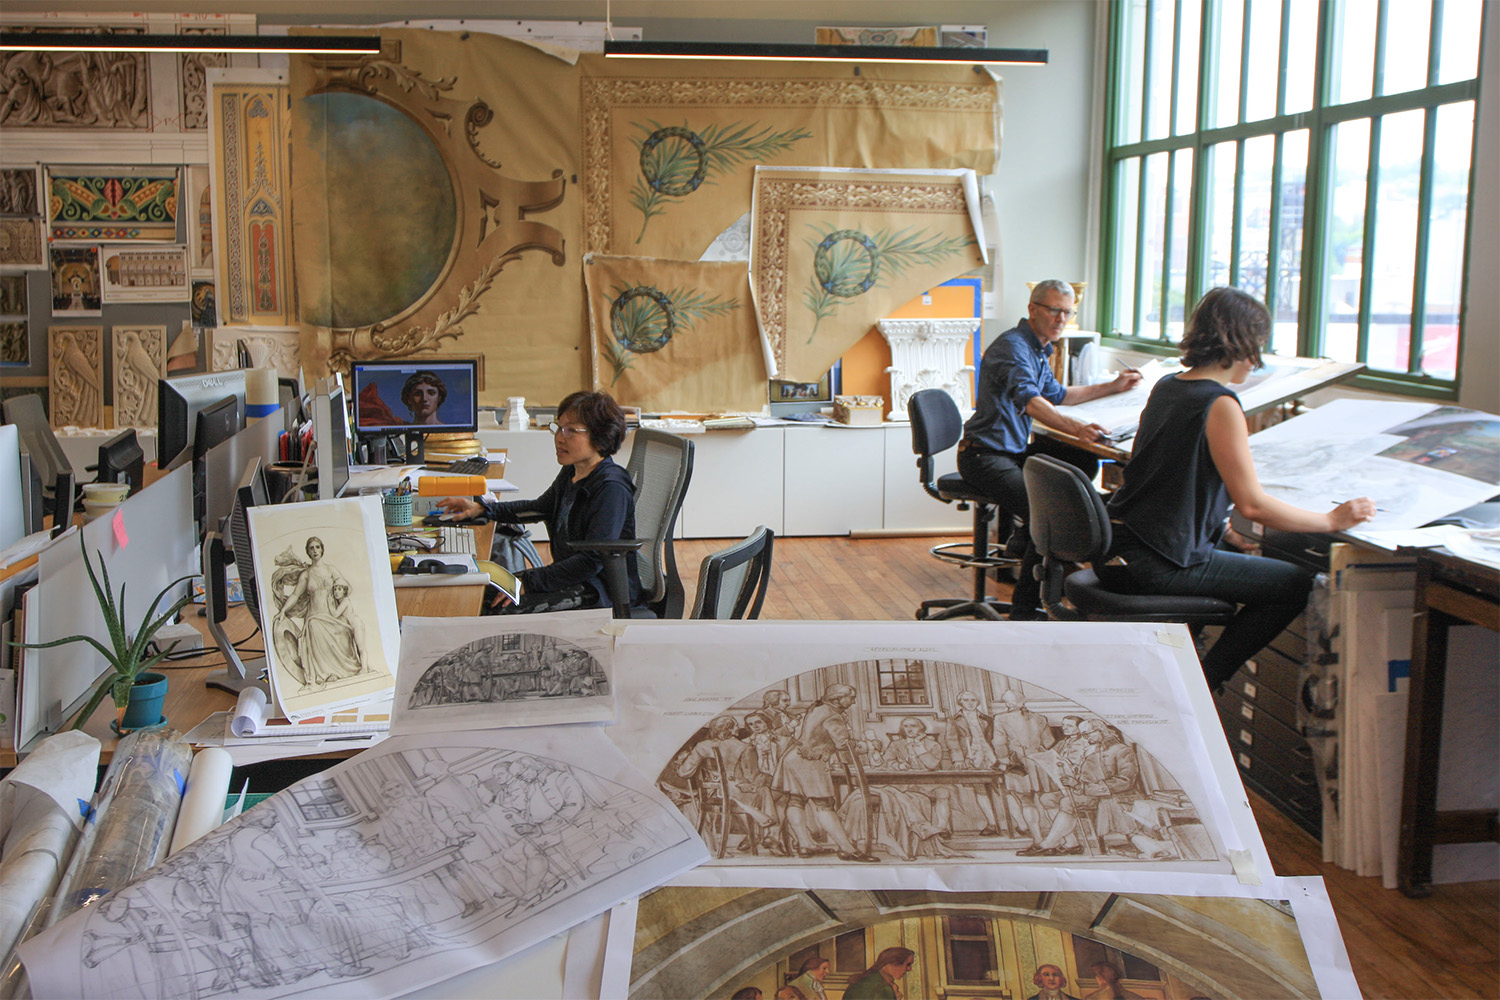 This is an image of studio artists working in the EverGreene Architectural Studio.